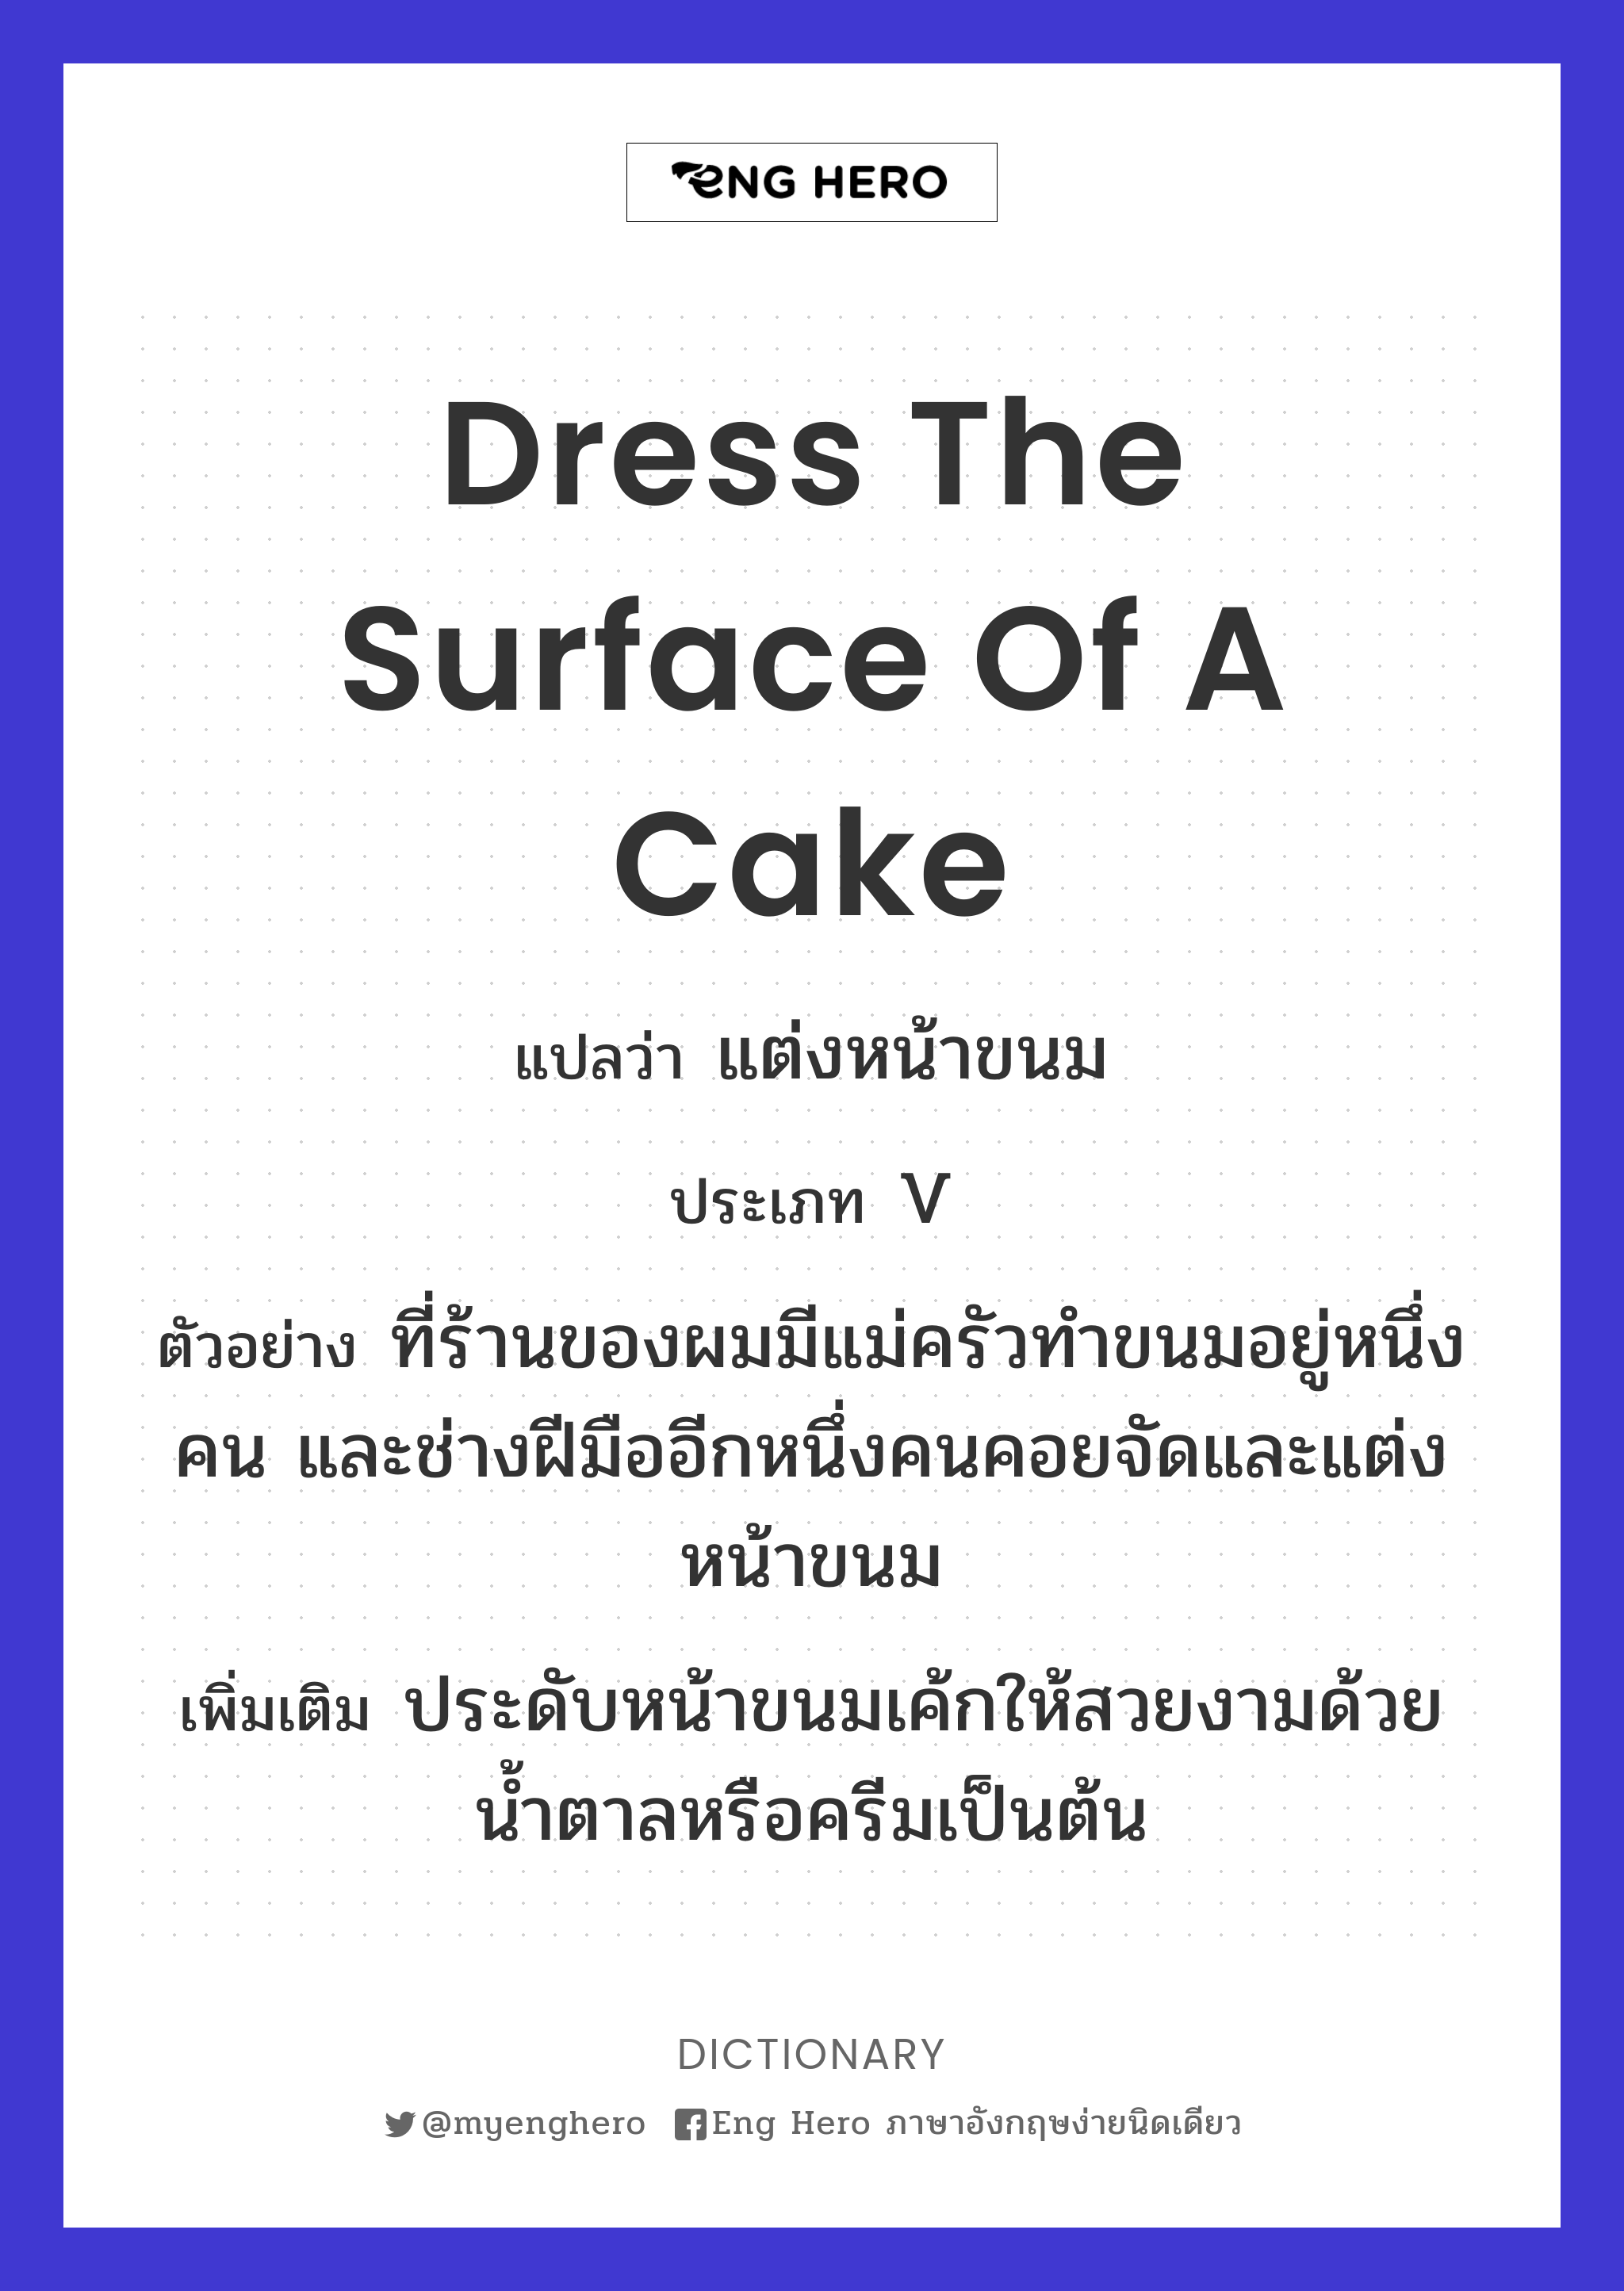 dress the surface of a cake